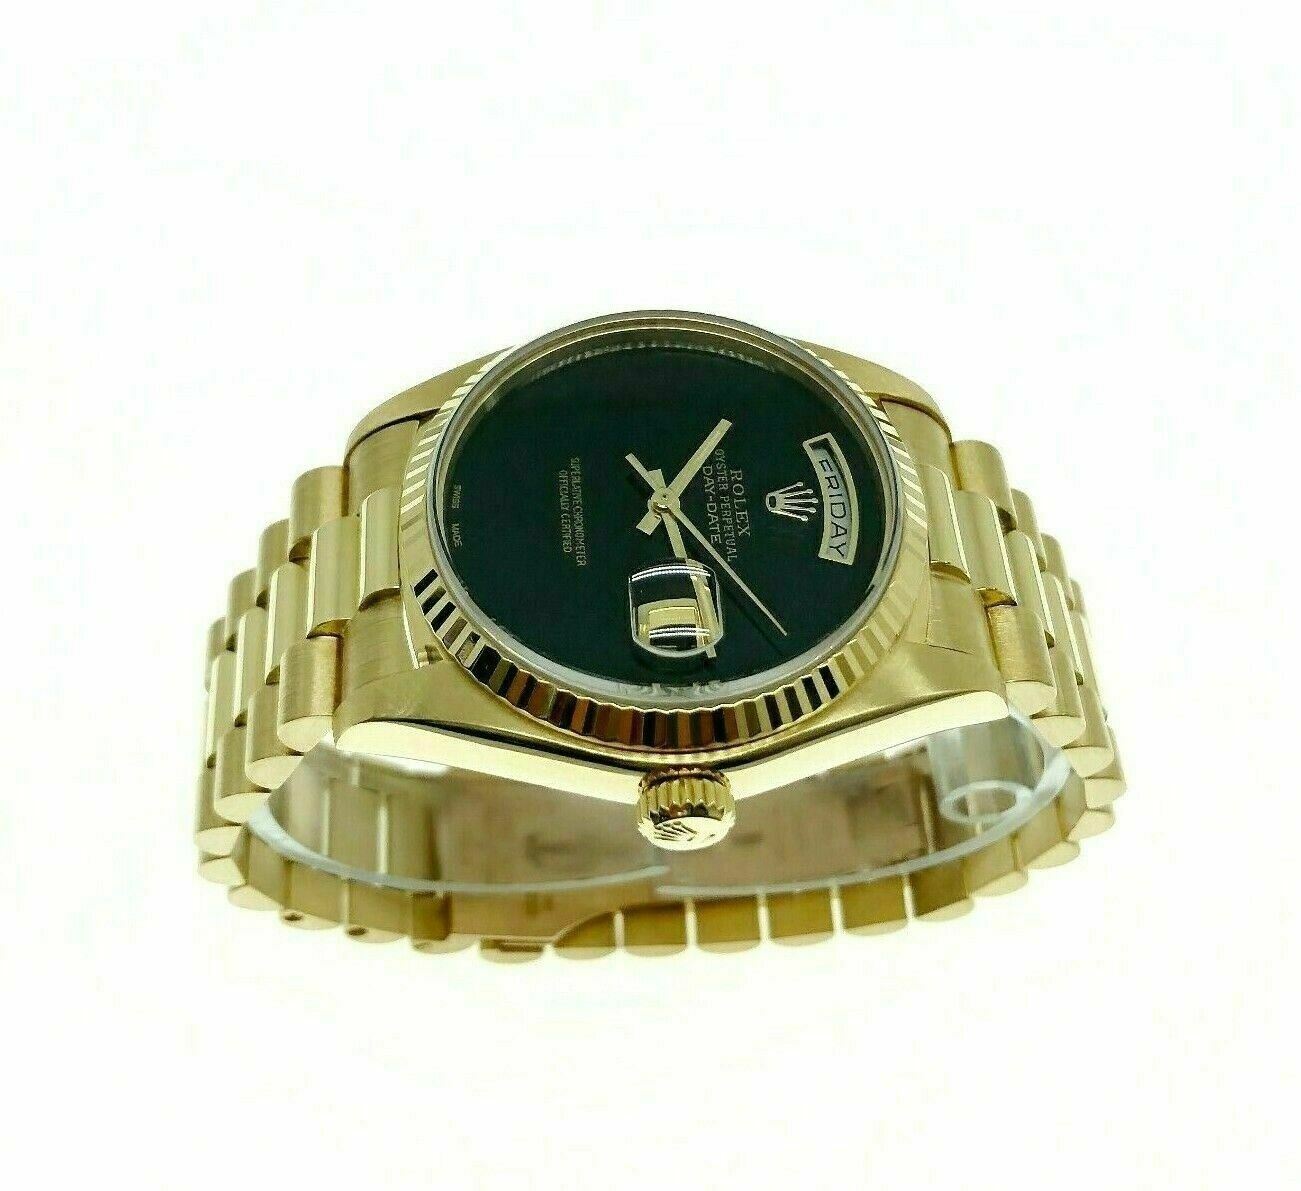 Rolex Day Date 18K President 36mm Watch 18038 Vintage 1980's with Onyx Dial